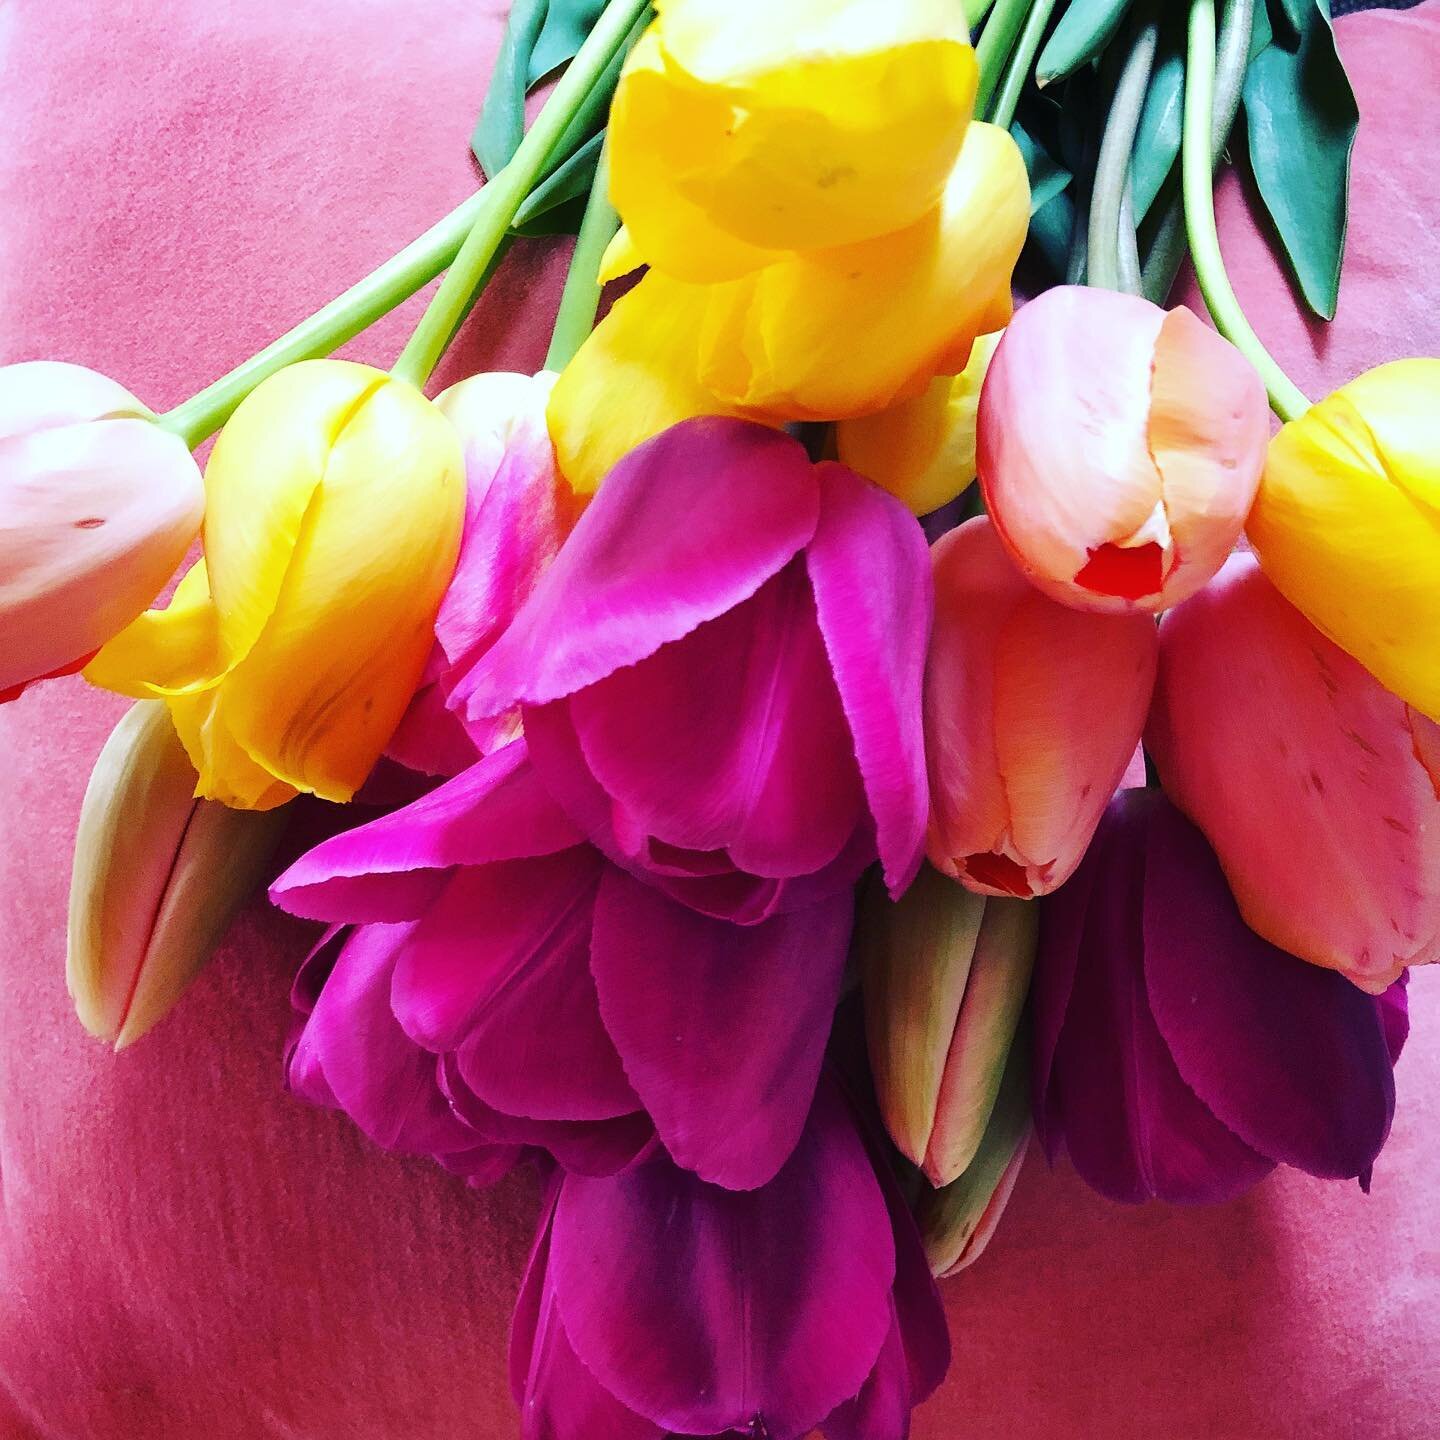 Thank goodness for flower friends! The wonderful @tinktastichana dropped off these beeeeeaaautiful fresh vibrant garden #tulips  to brighten our day! Gratitude for special friends, spring flowers, abundant gifts and kindred flower spirits 💕🌸🌱